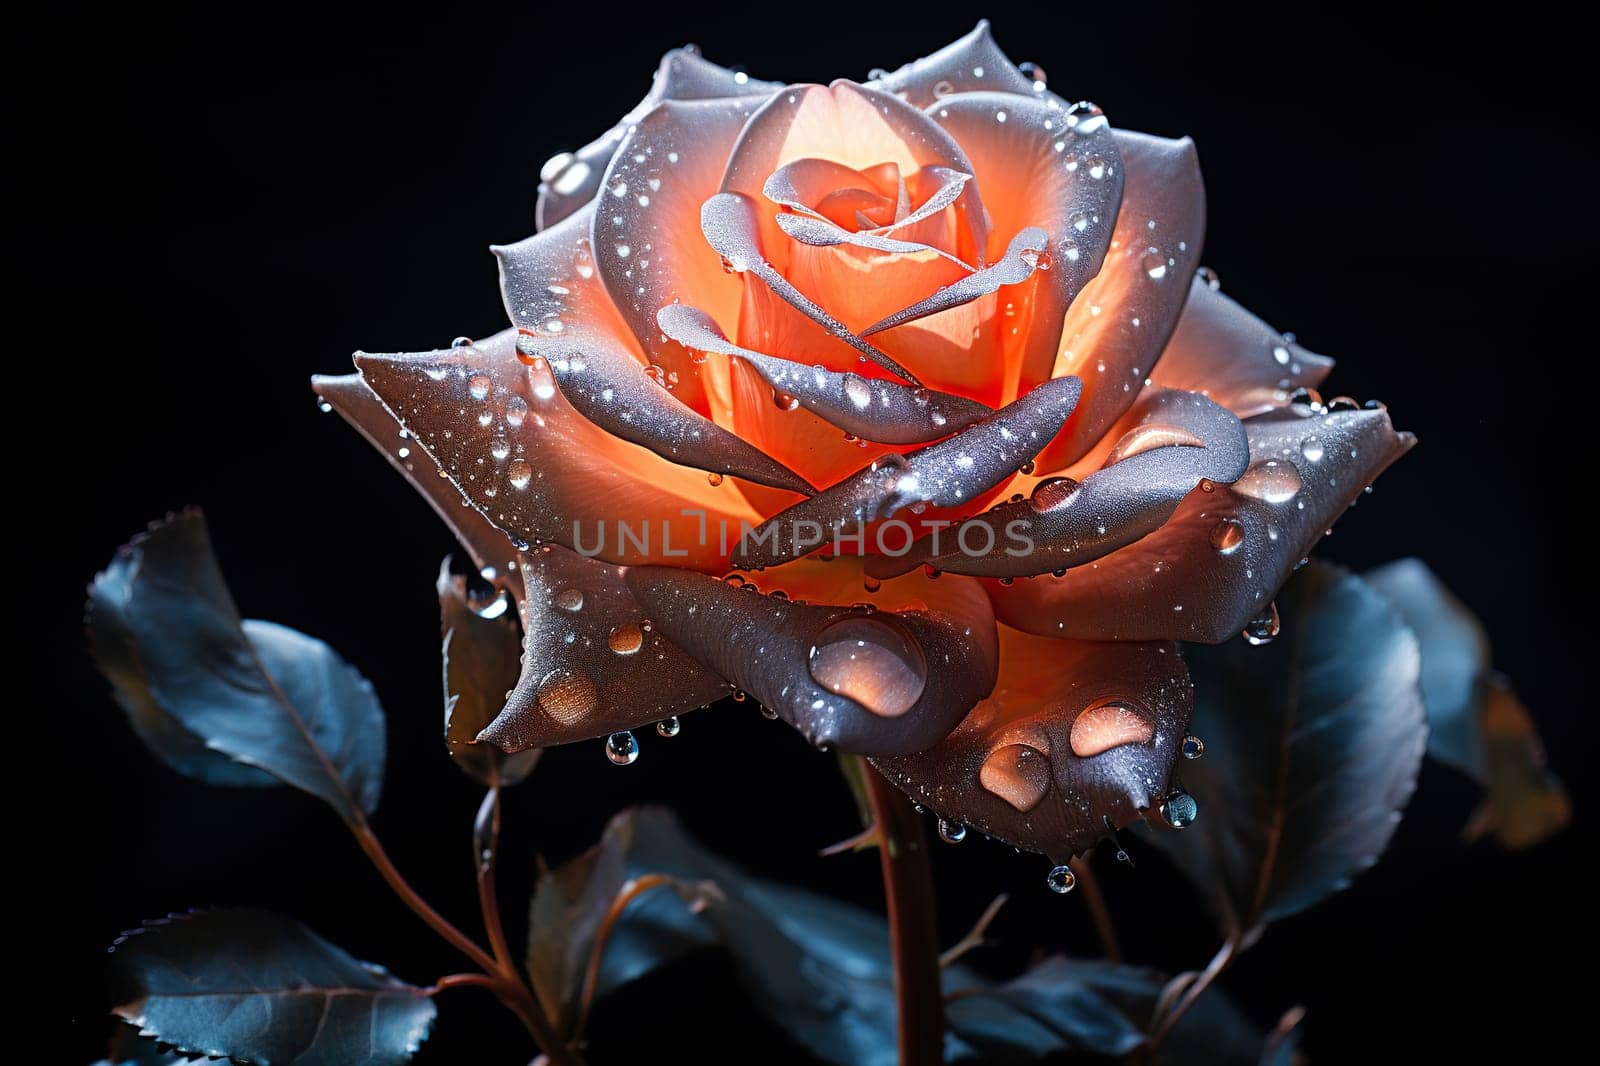 A beautiful rose with large drops of water on the petals in dramatic lighting.